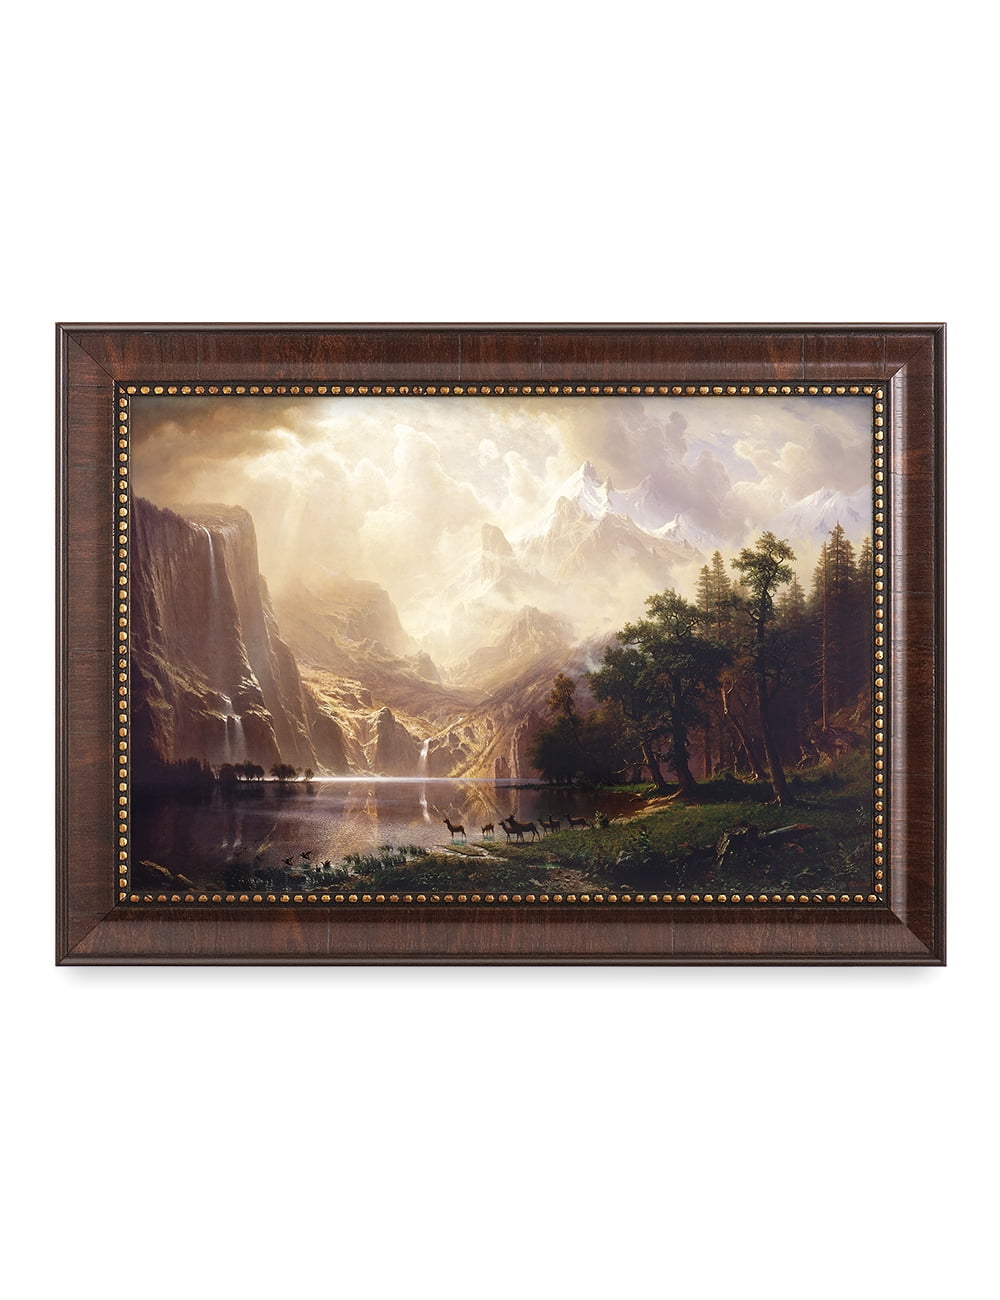 DECORARTS Among the Sierra Nevada, California by Albert Bierstadt.  Classic Art Reproduction, Giclee Print on Canvas. Ready to Hang Framed Wall  Art for Wall Decor. Total Size w/ Frame: 21x15